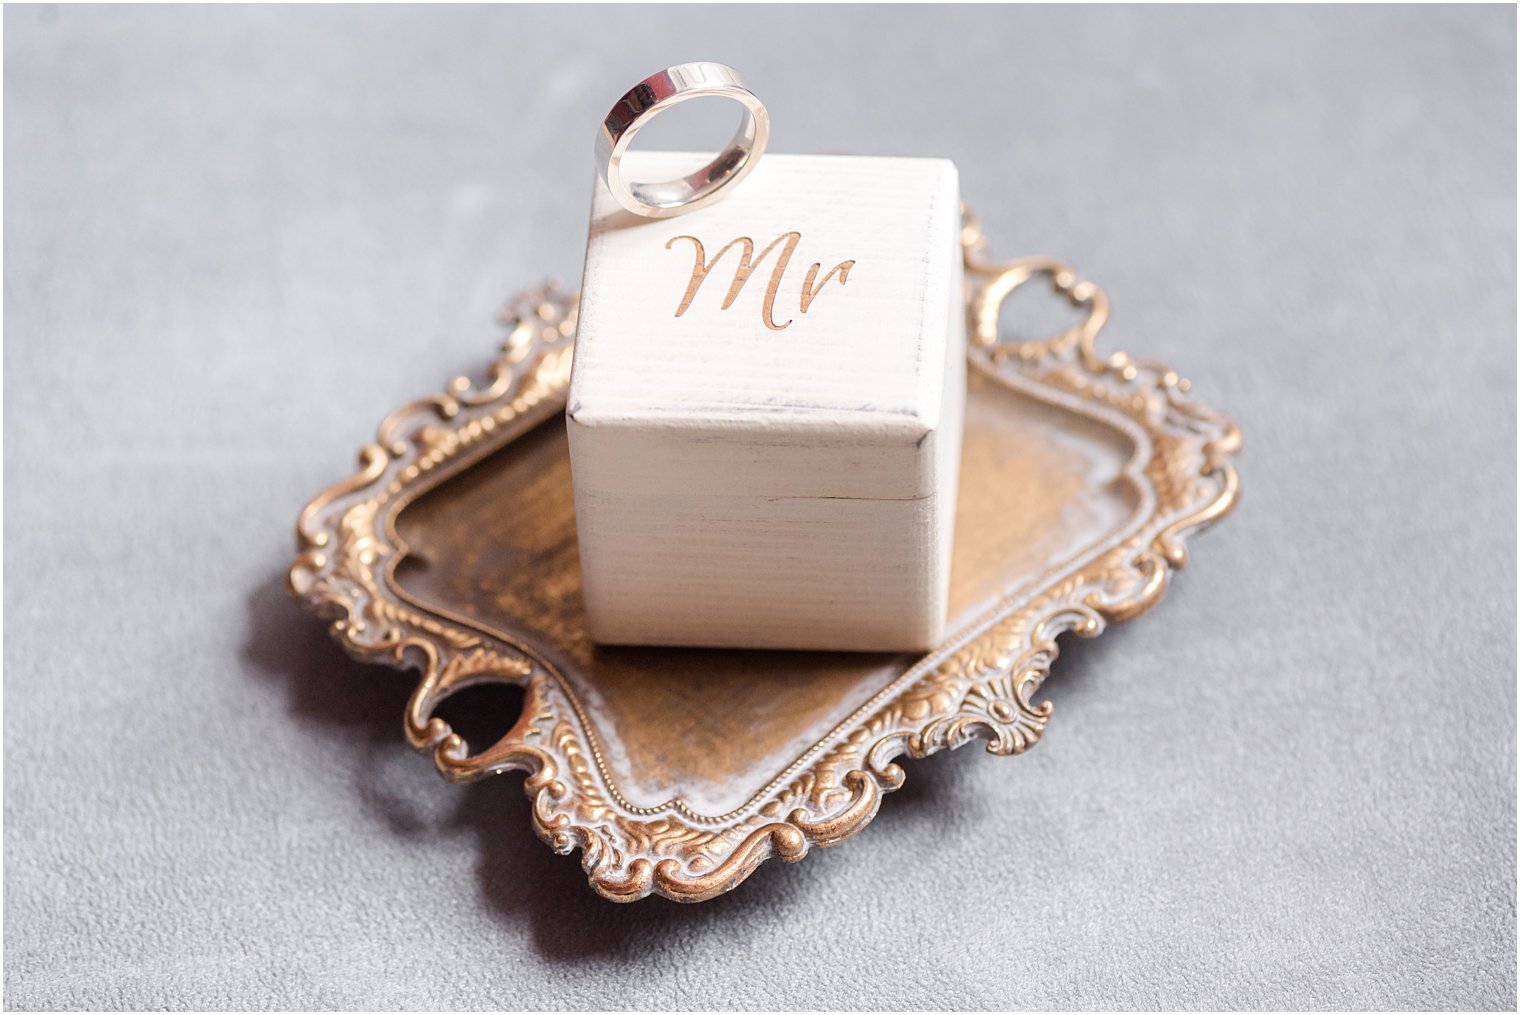 groom's ring rests on top of white MR box